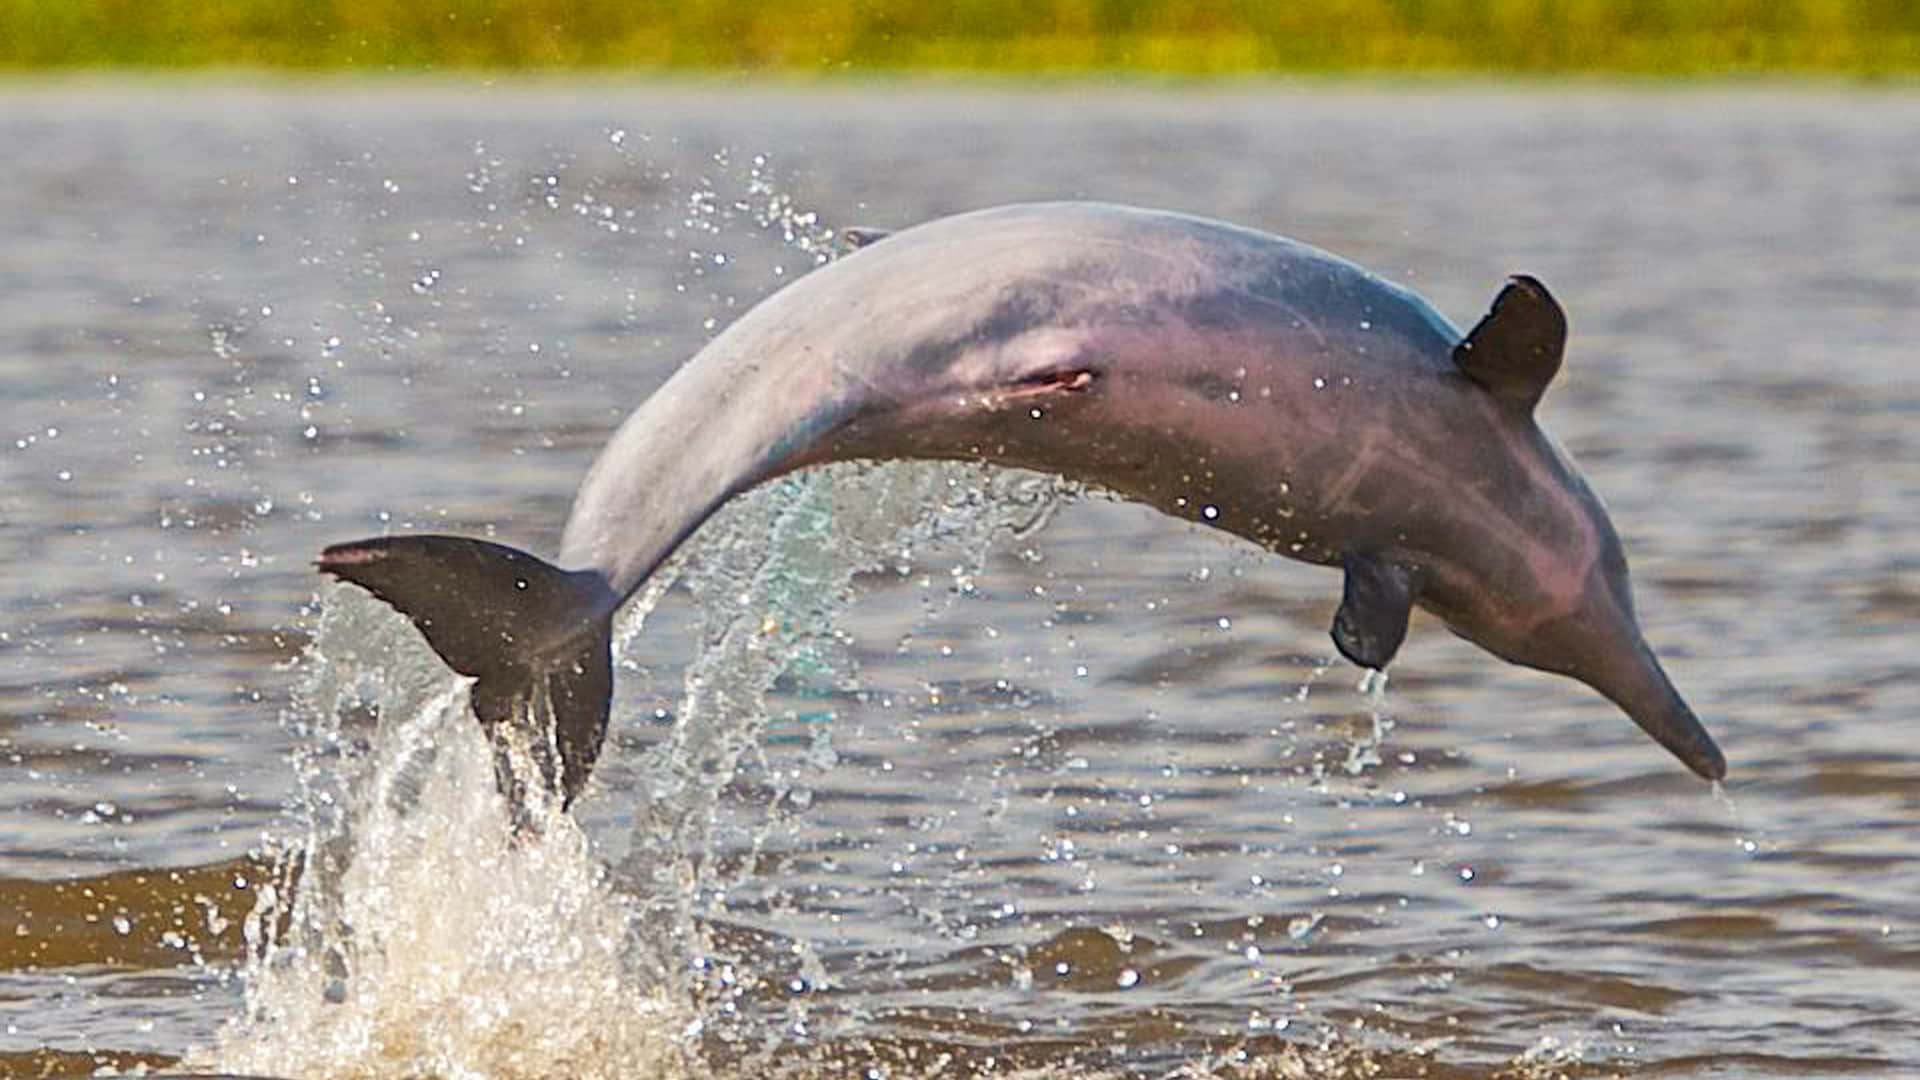 River dolphin jumping out of the water | Responsible Travel Peru